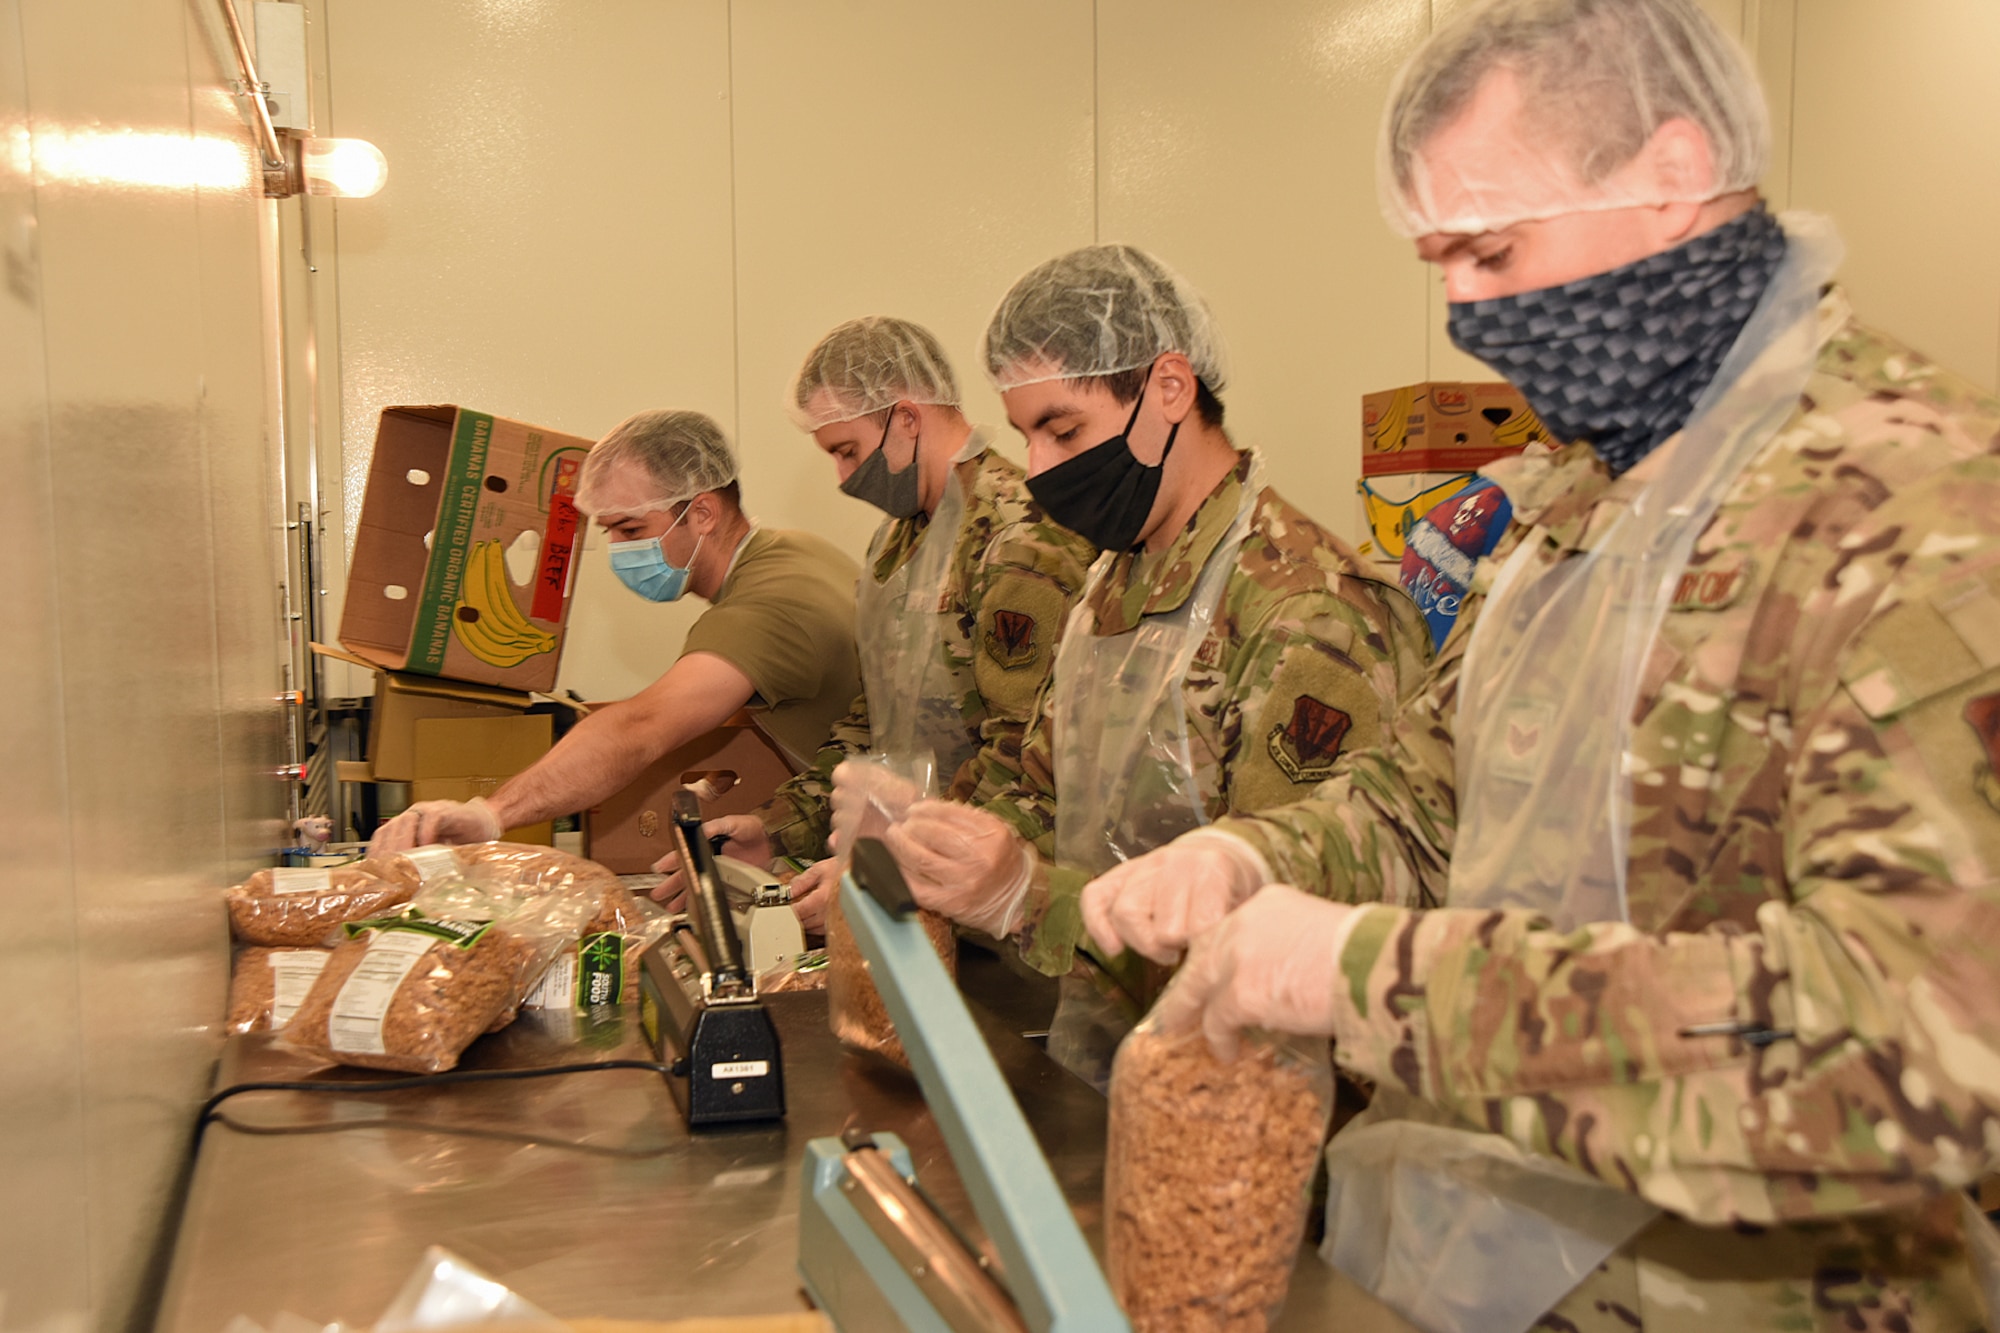 Members from the 110th Wing, Battle Creek Air National Guard Base, Mich., now part of the Michigan National Guard COVID-19 Joint Task Force, work with the Food Bank of South Michigan, labeling, filling, and weighing bags of donated granola for local food pantries in Battle Creek, Sep. 11, 2020. The Food Bank warehouse serves 8 counties consisting of 285 food pantries in southern Michigan. Since March, Michigan National Guard teams have supported food banks across Michigan, distributing more than 7 million pounds of food to local communities. (U.S. Air National Guard photo by Master Sgt. David Kujawa)